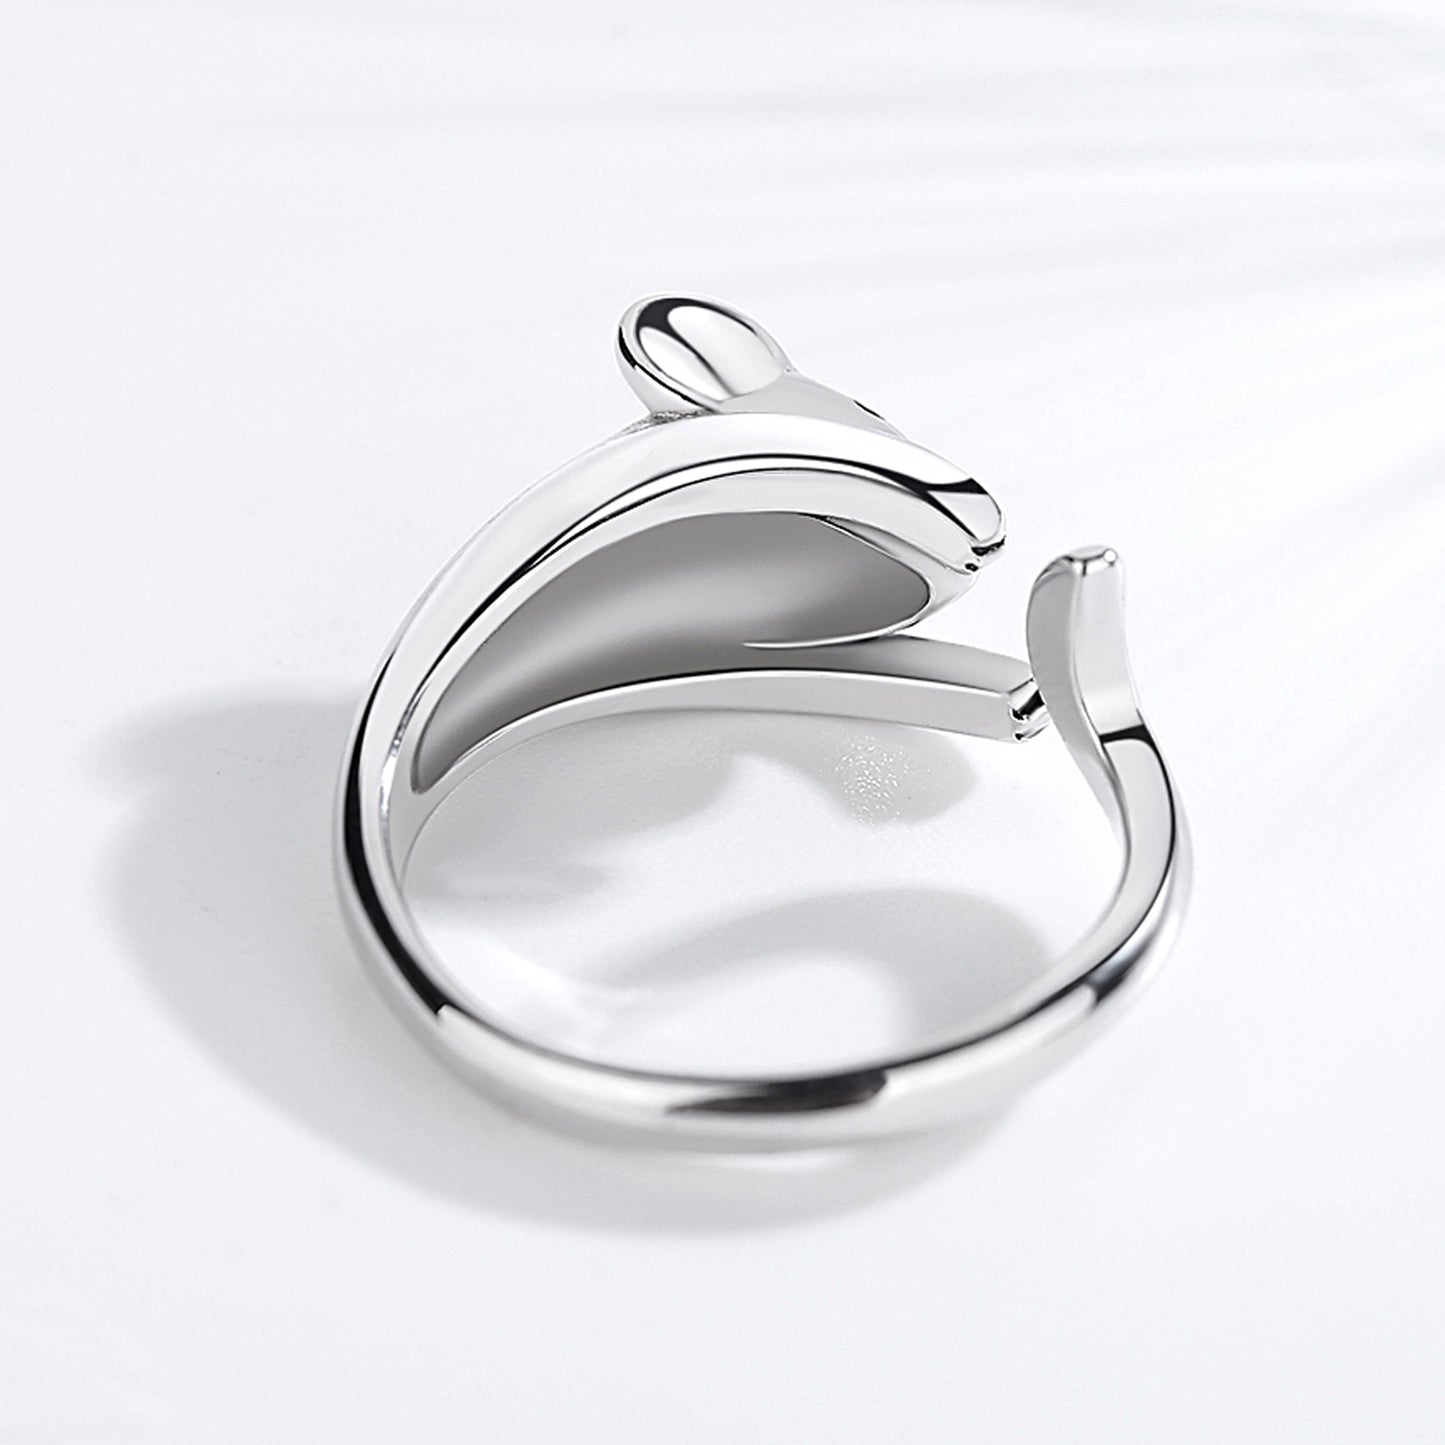 Relaxing Rat ring by SB - Style's Bug